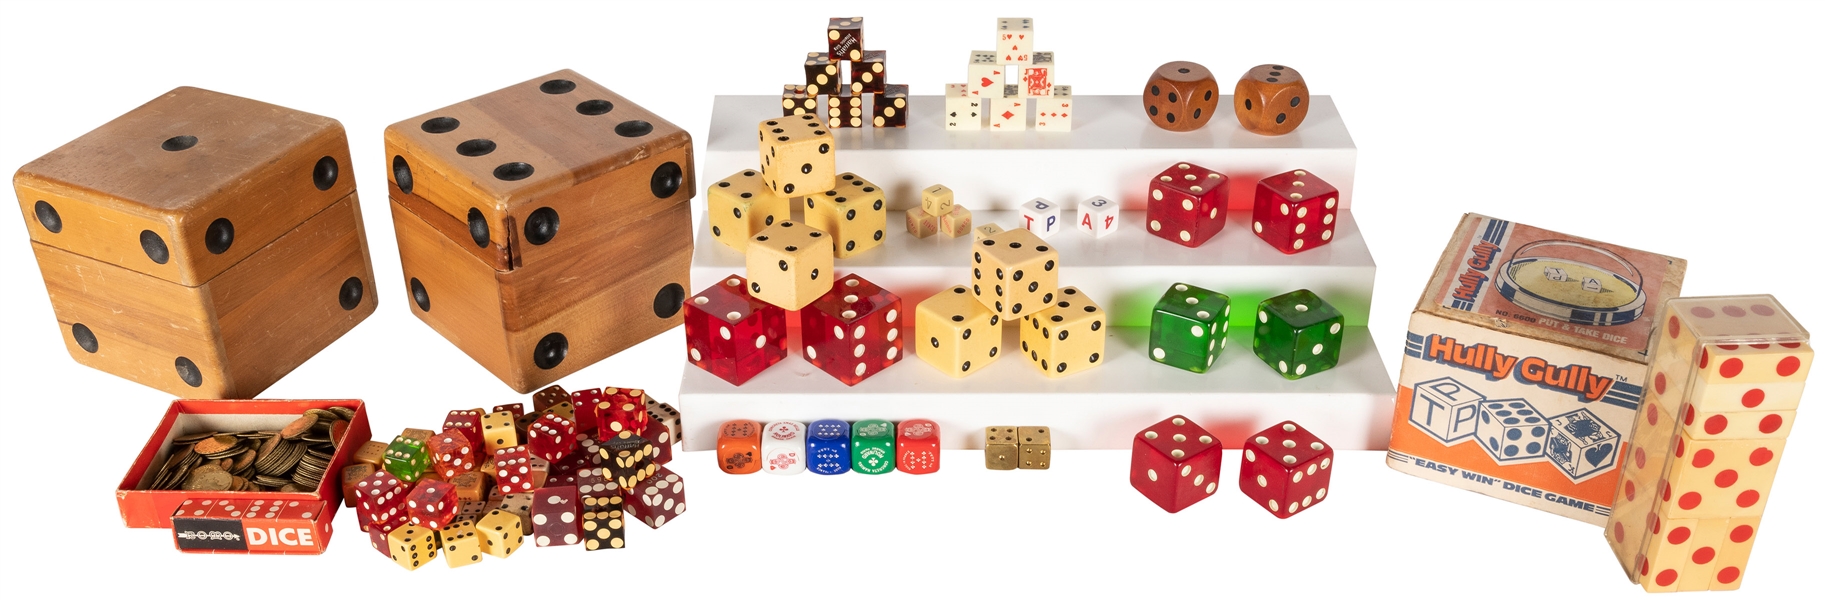  Gigantic collection of vintage dice and dice games. Massive...